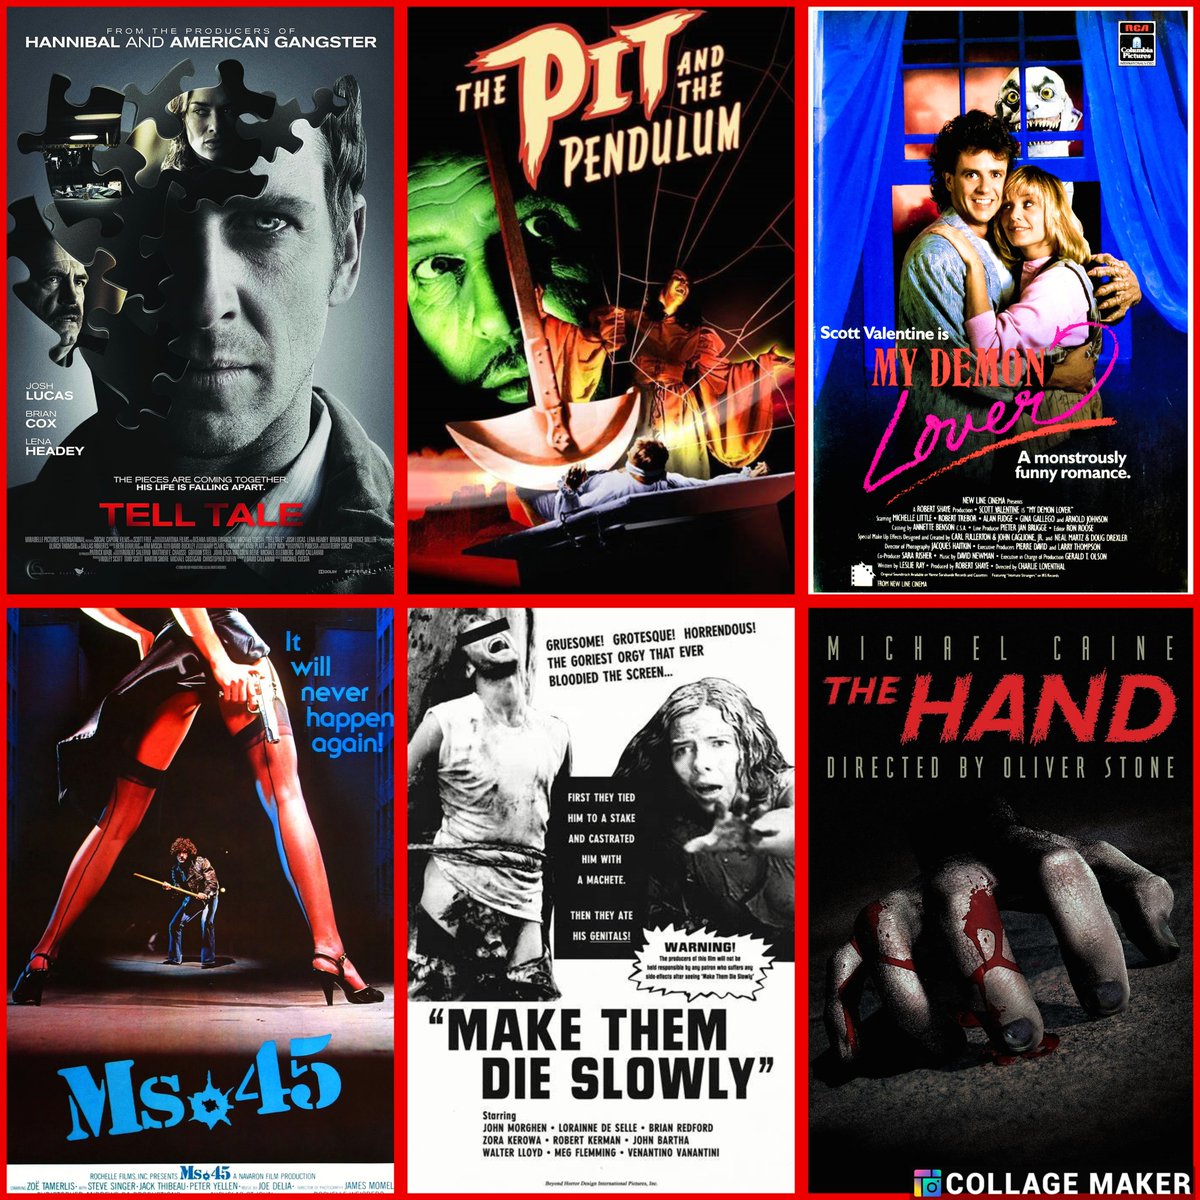 🩸Films Released on April 24th🩸

*The Hand 1981
*Night School 1981
*Cannibal Ferox aka Make Them Die Slowly 1981
*Ms .45 1981
*My Demon Lover 1987
*The Pit and the Pendulum 2009